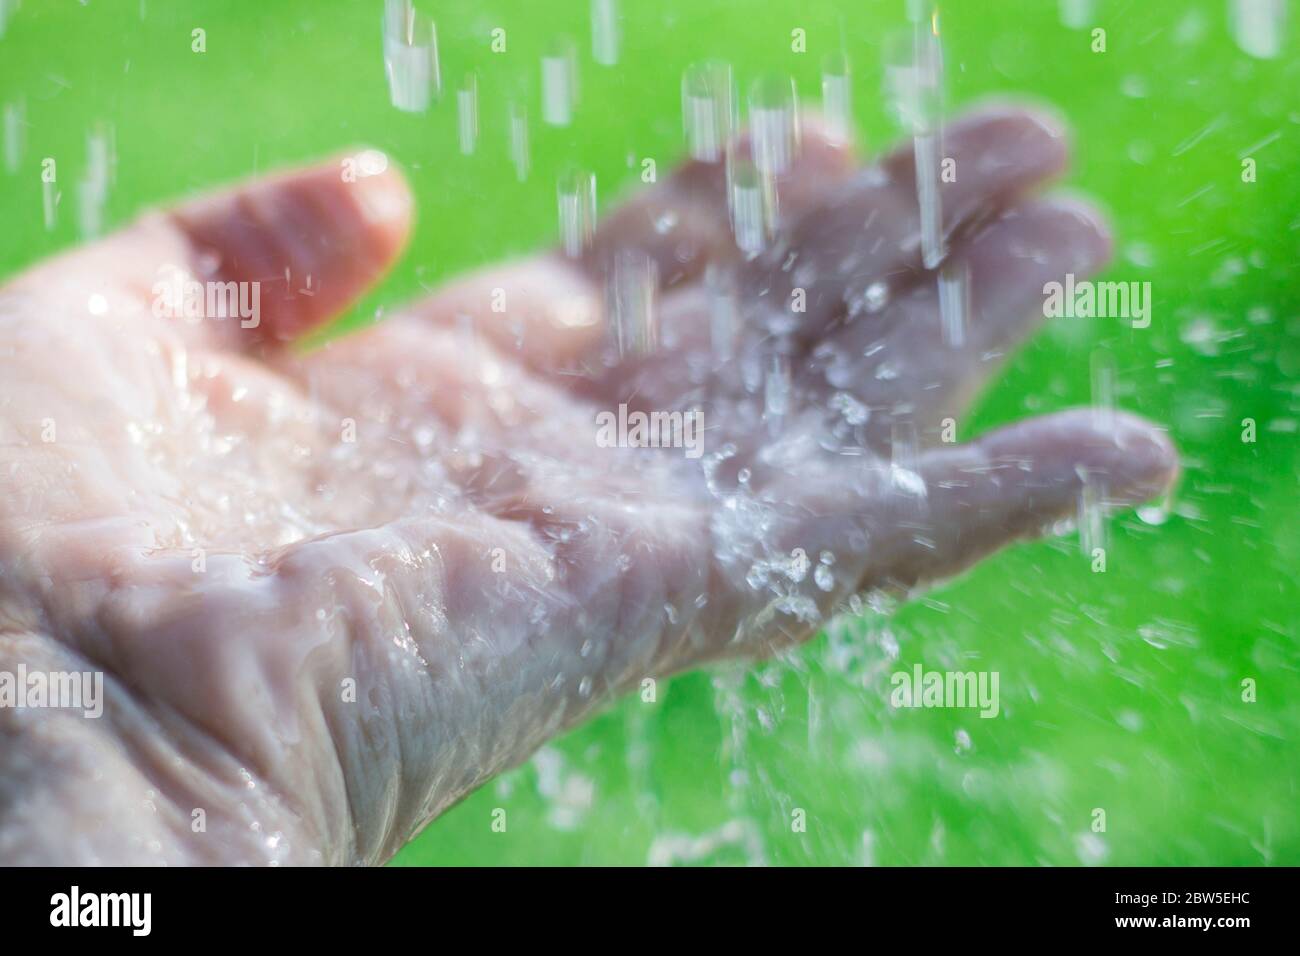 Water splashing on an outstretched hand. Stock Photo